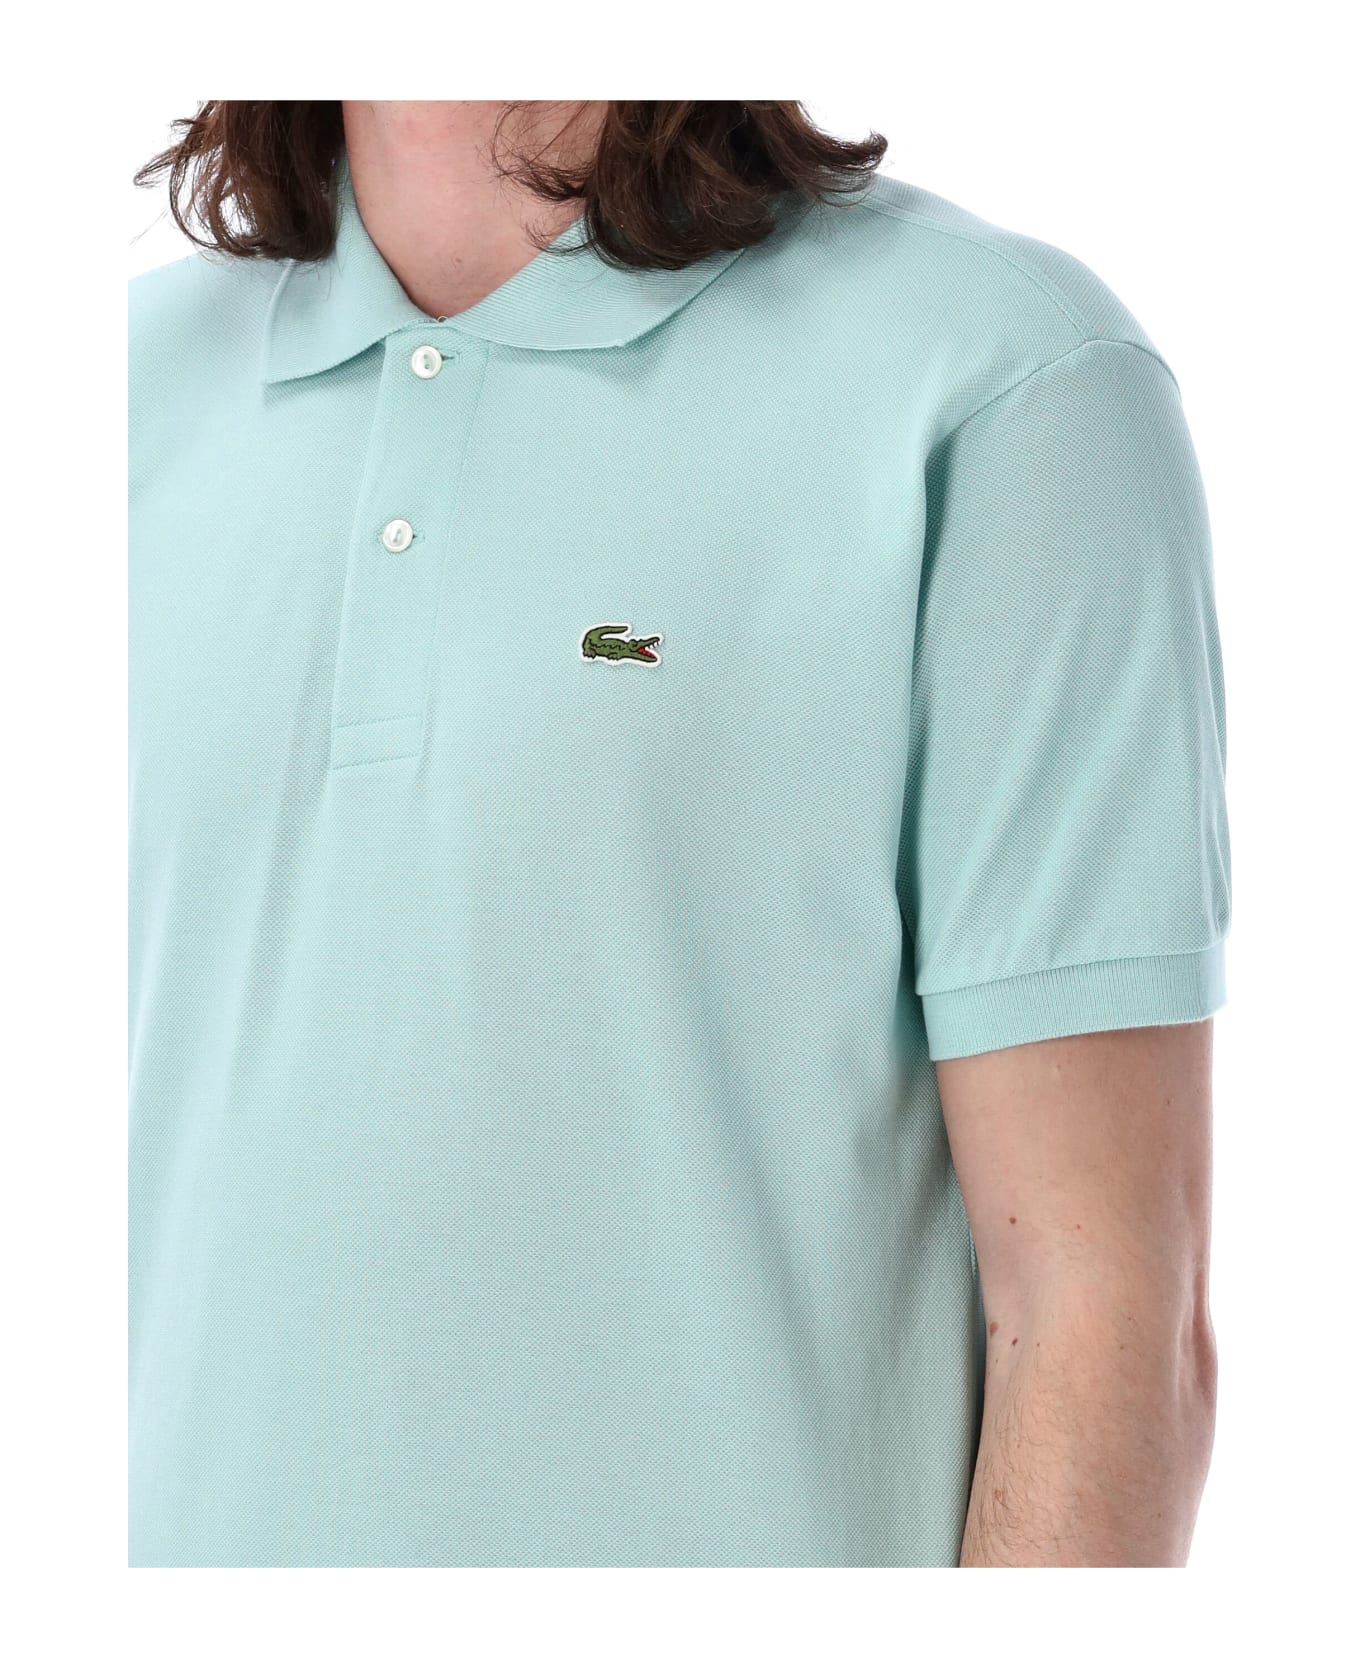 Lacoste Classic Fit Polo Shirt - LIGHT MINT ポロシャツ